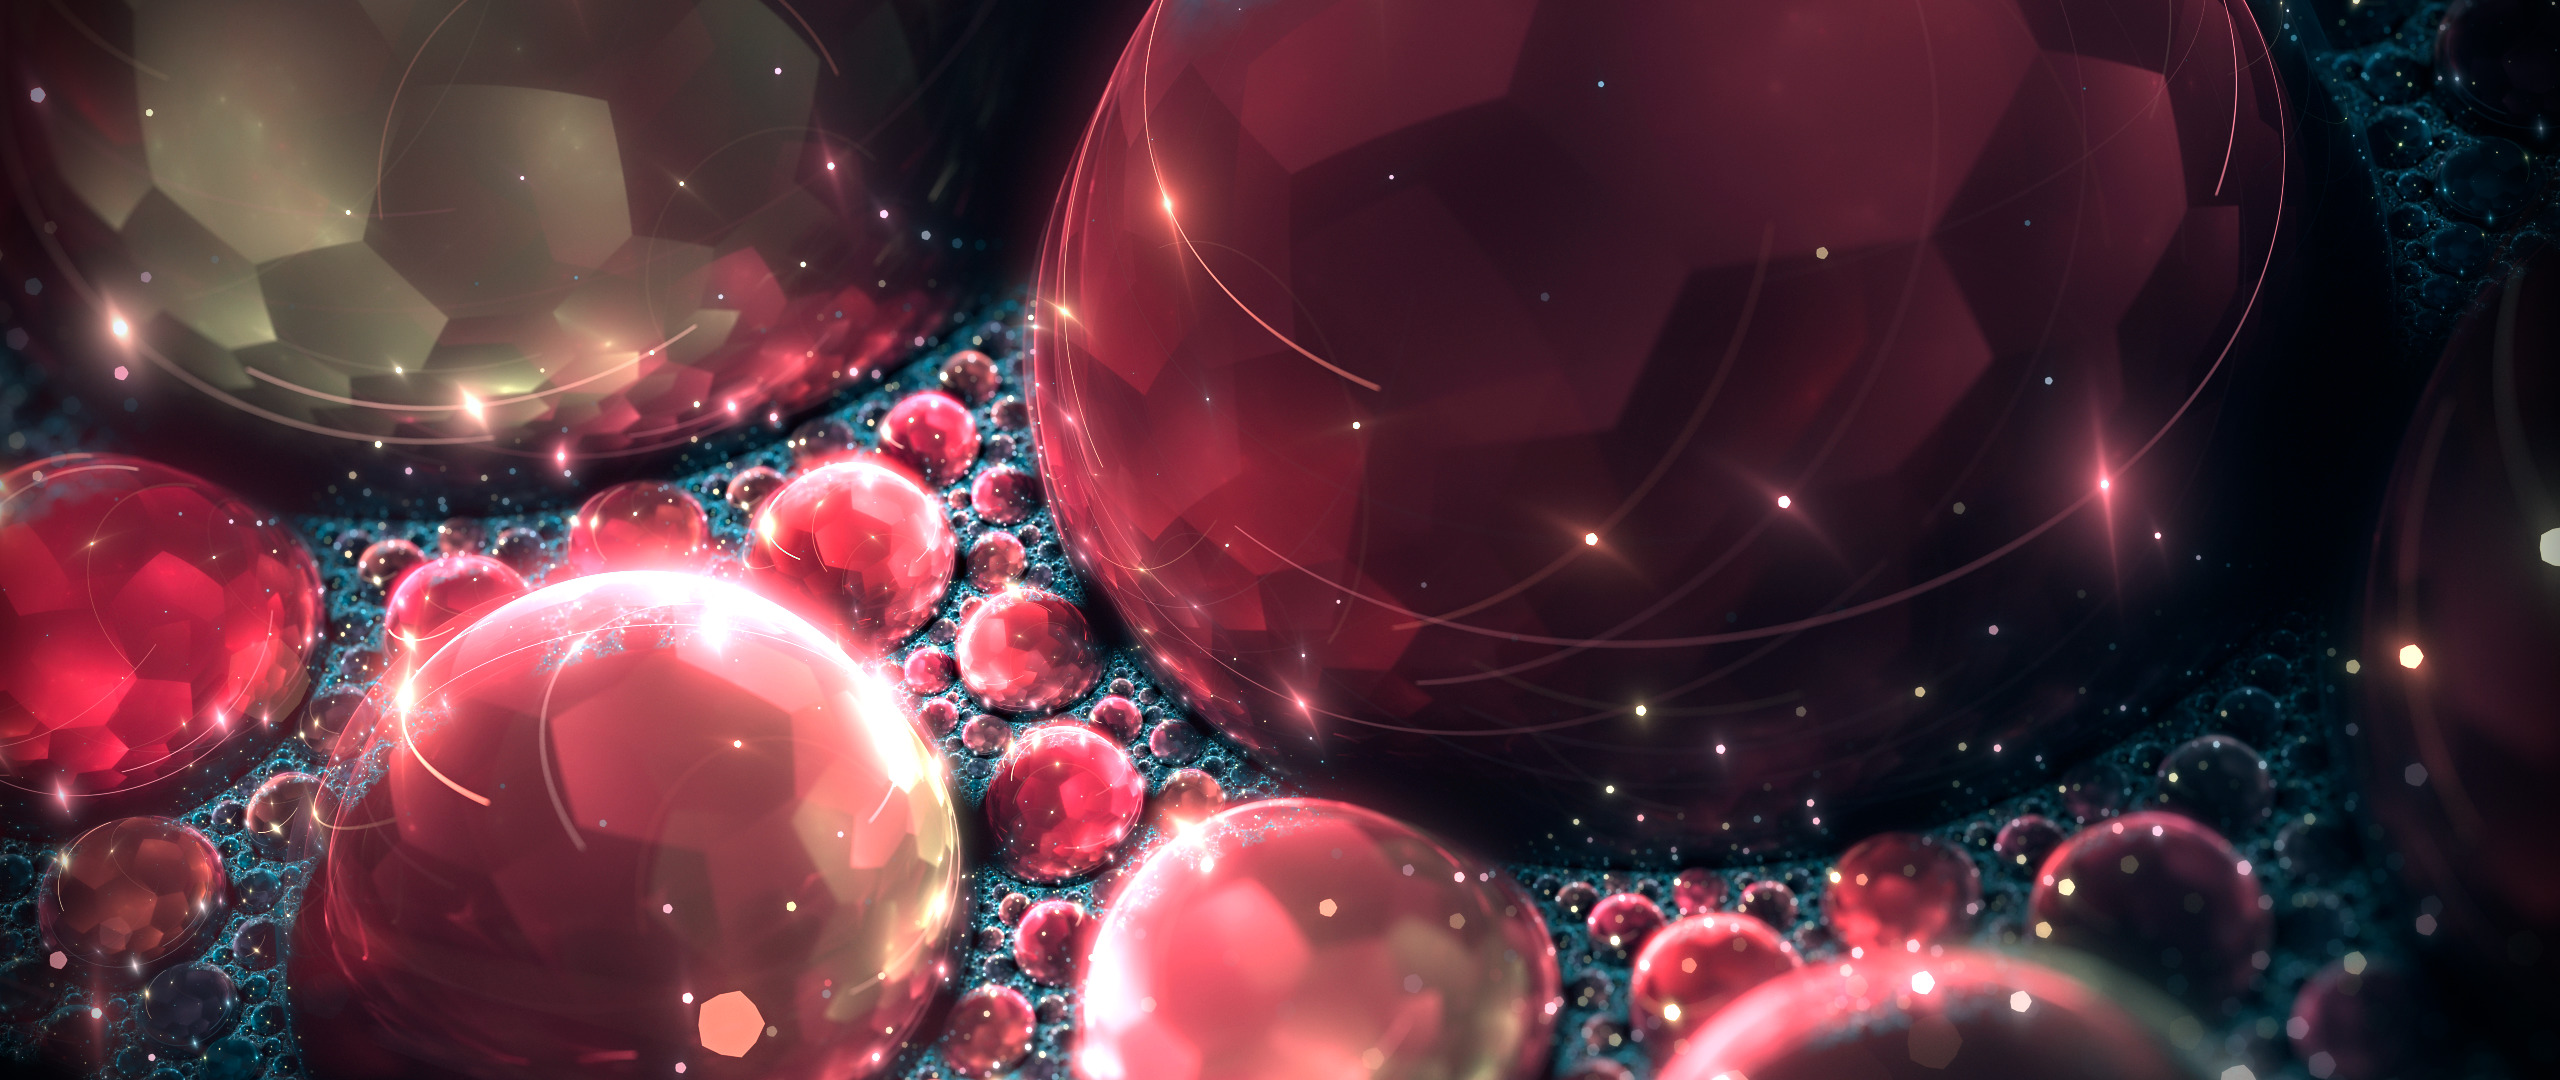 artwork, Digital Art, Crystallized, Bubbles, Abstract, Black And Red Wallpaper